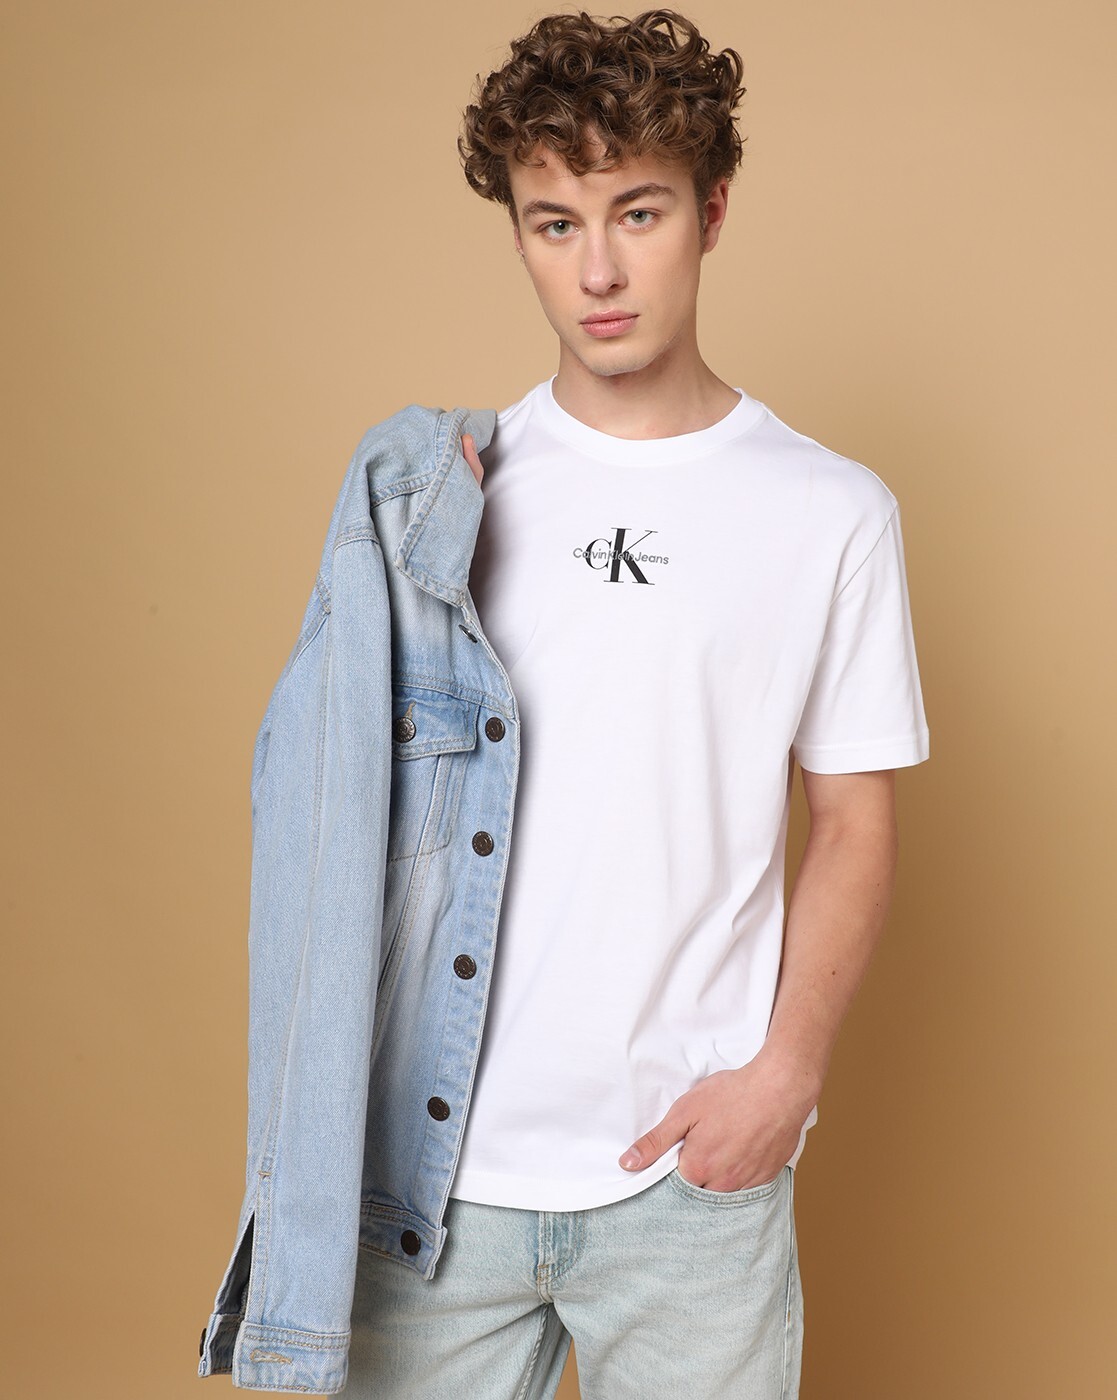 Buy White Tshirts Men for Klein Calvin by Jeans Online